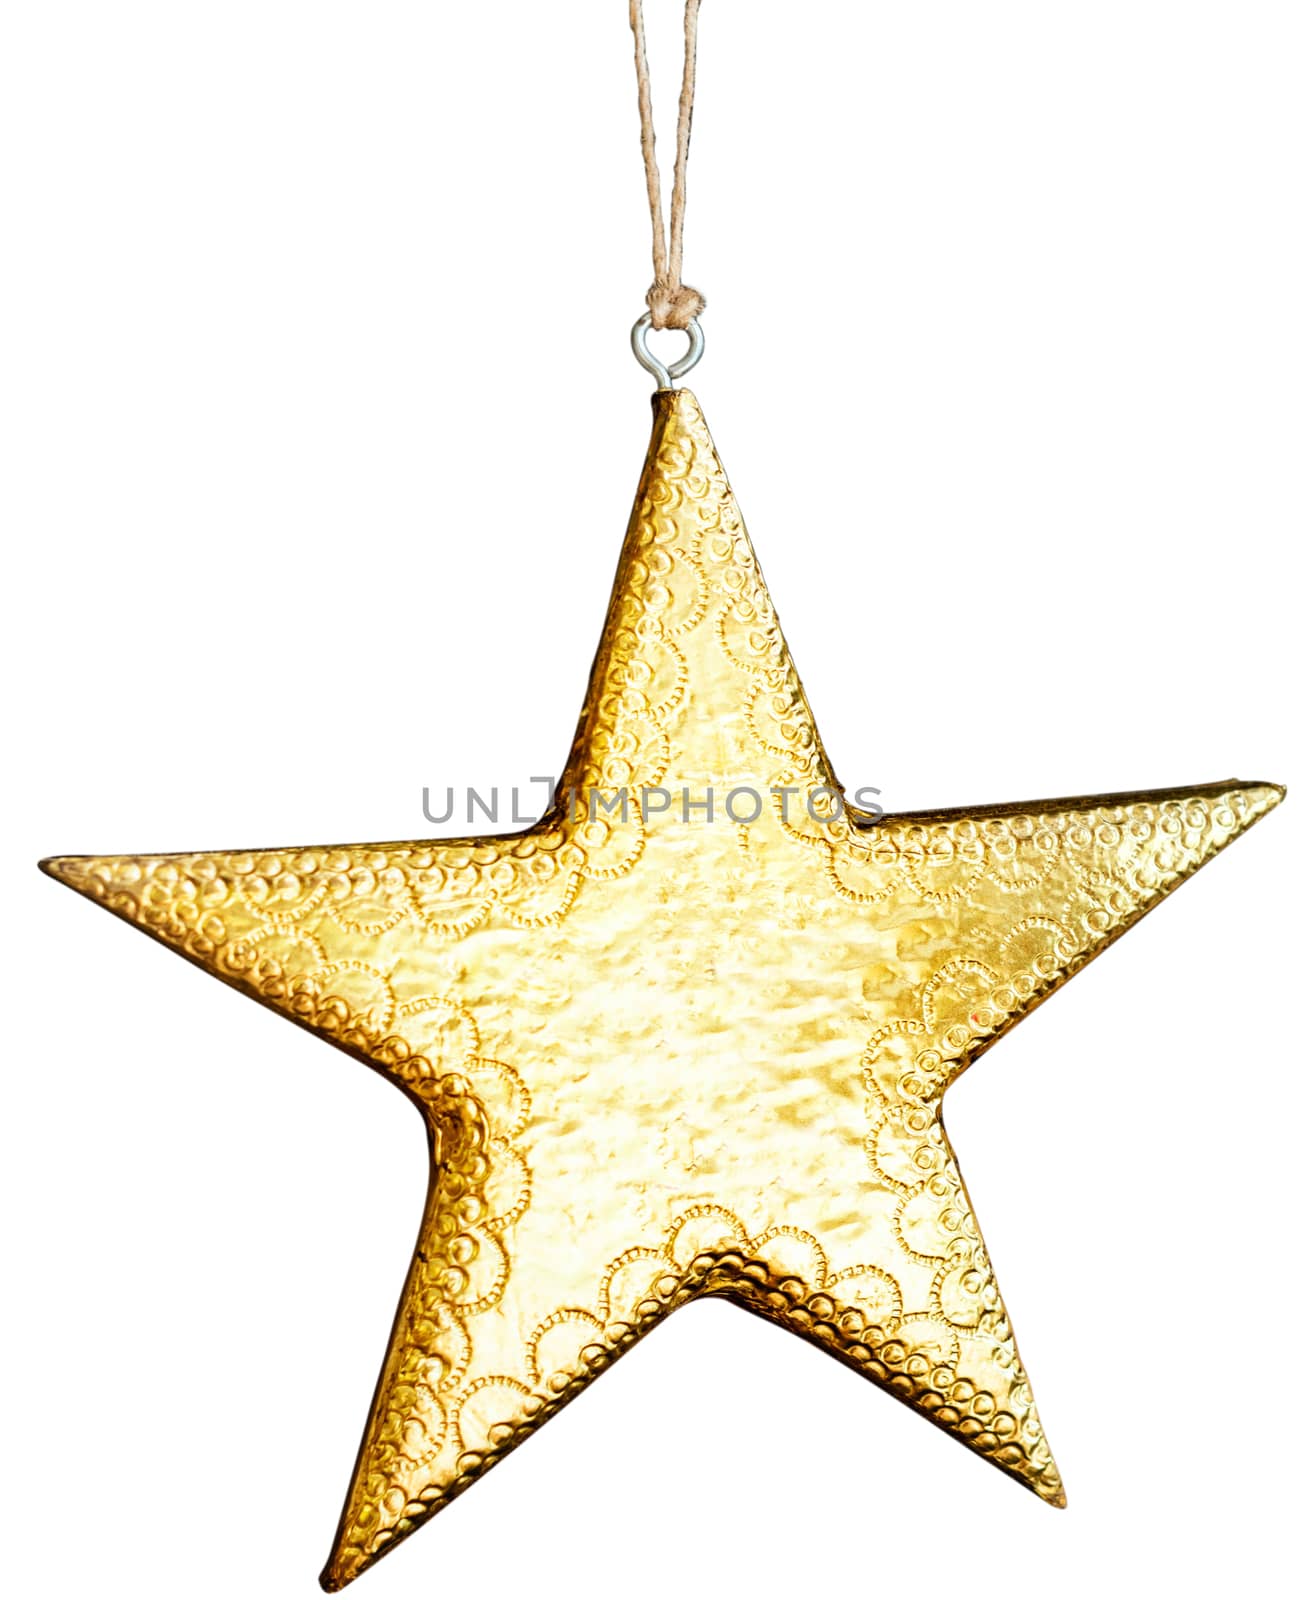 Christmas star decoration ornament isolated on white background. Background or texture